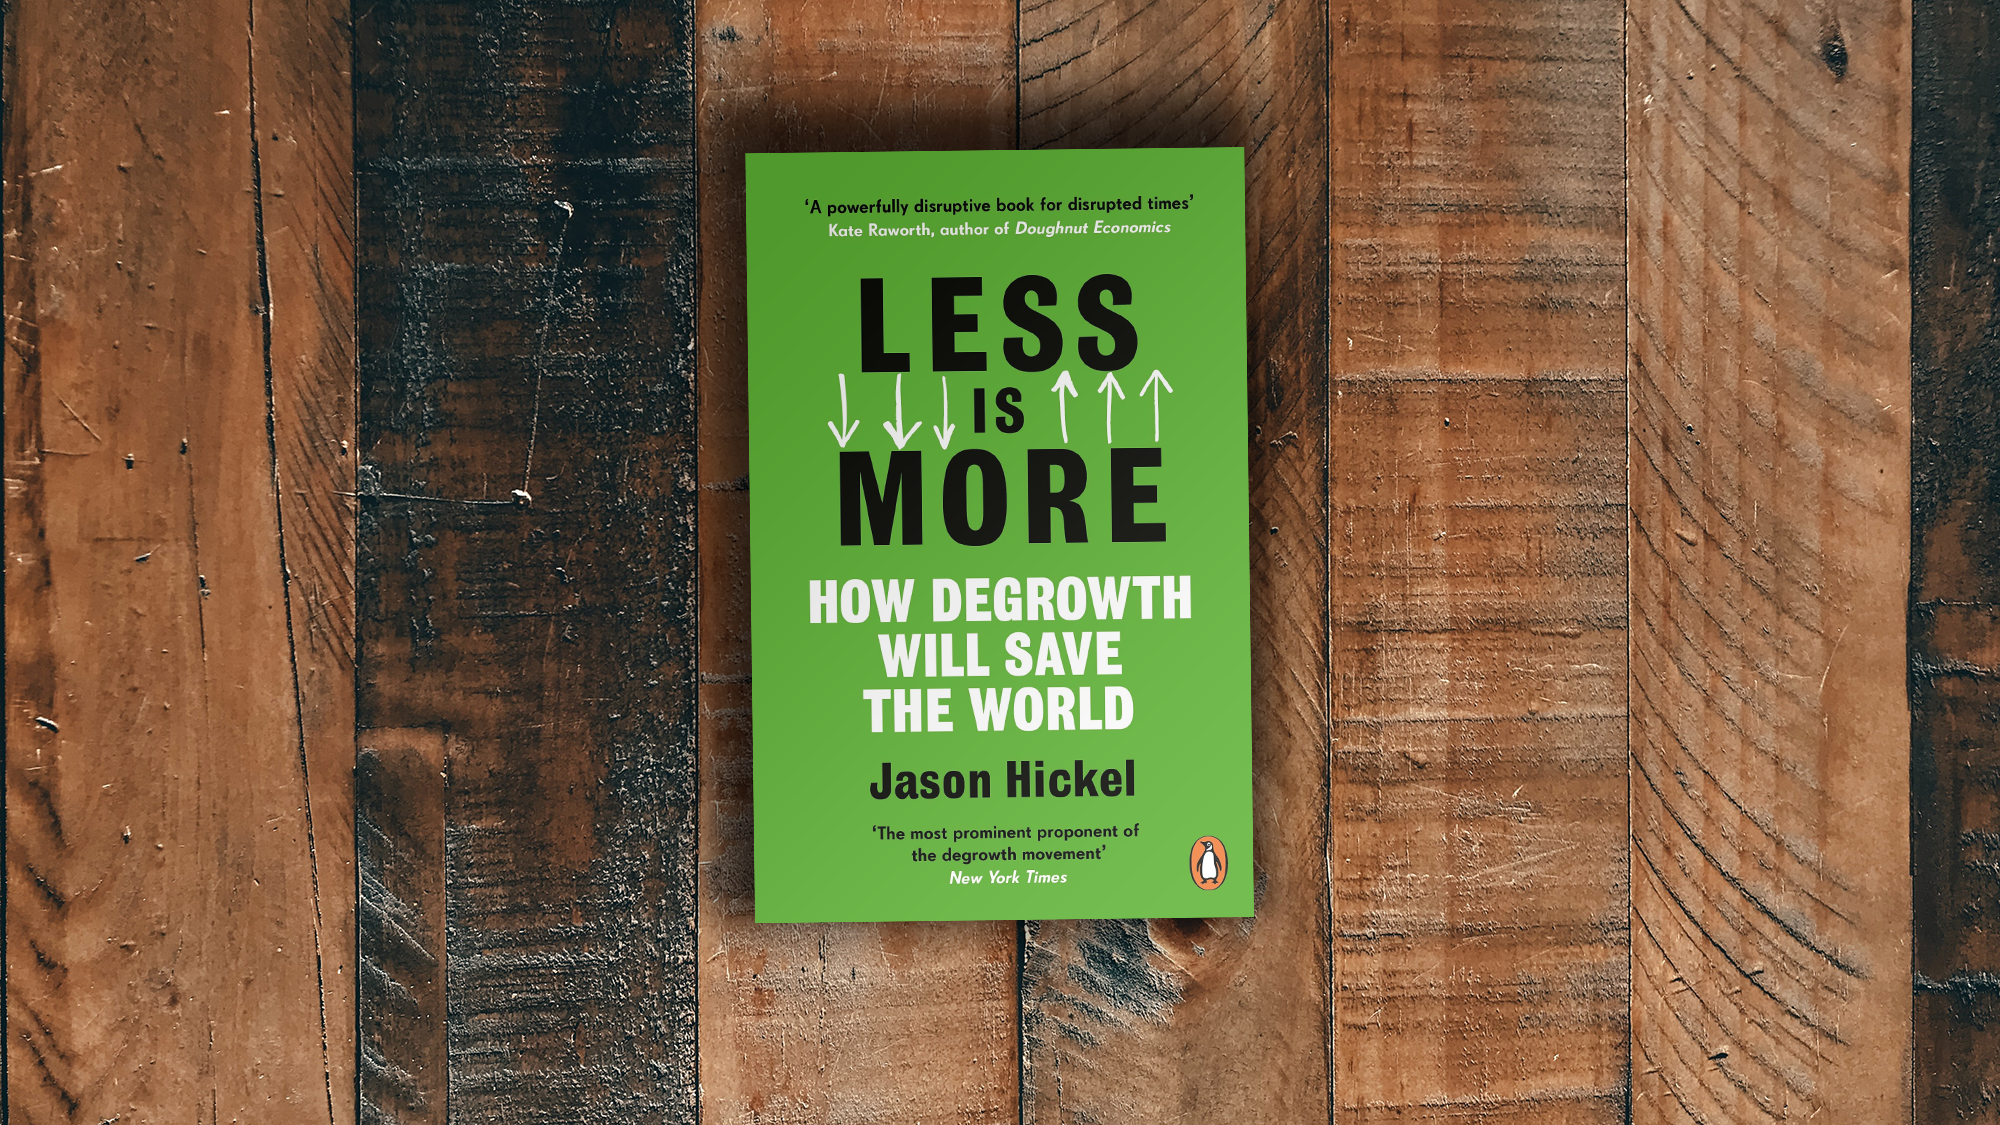 Cover of the book "Less is more" by J. Hickel. Background by Jan Antonin Kolar on Unsplash